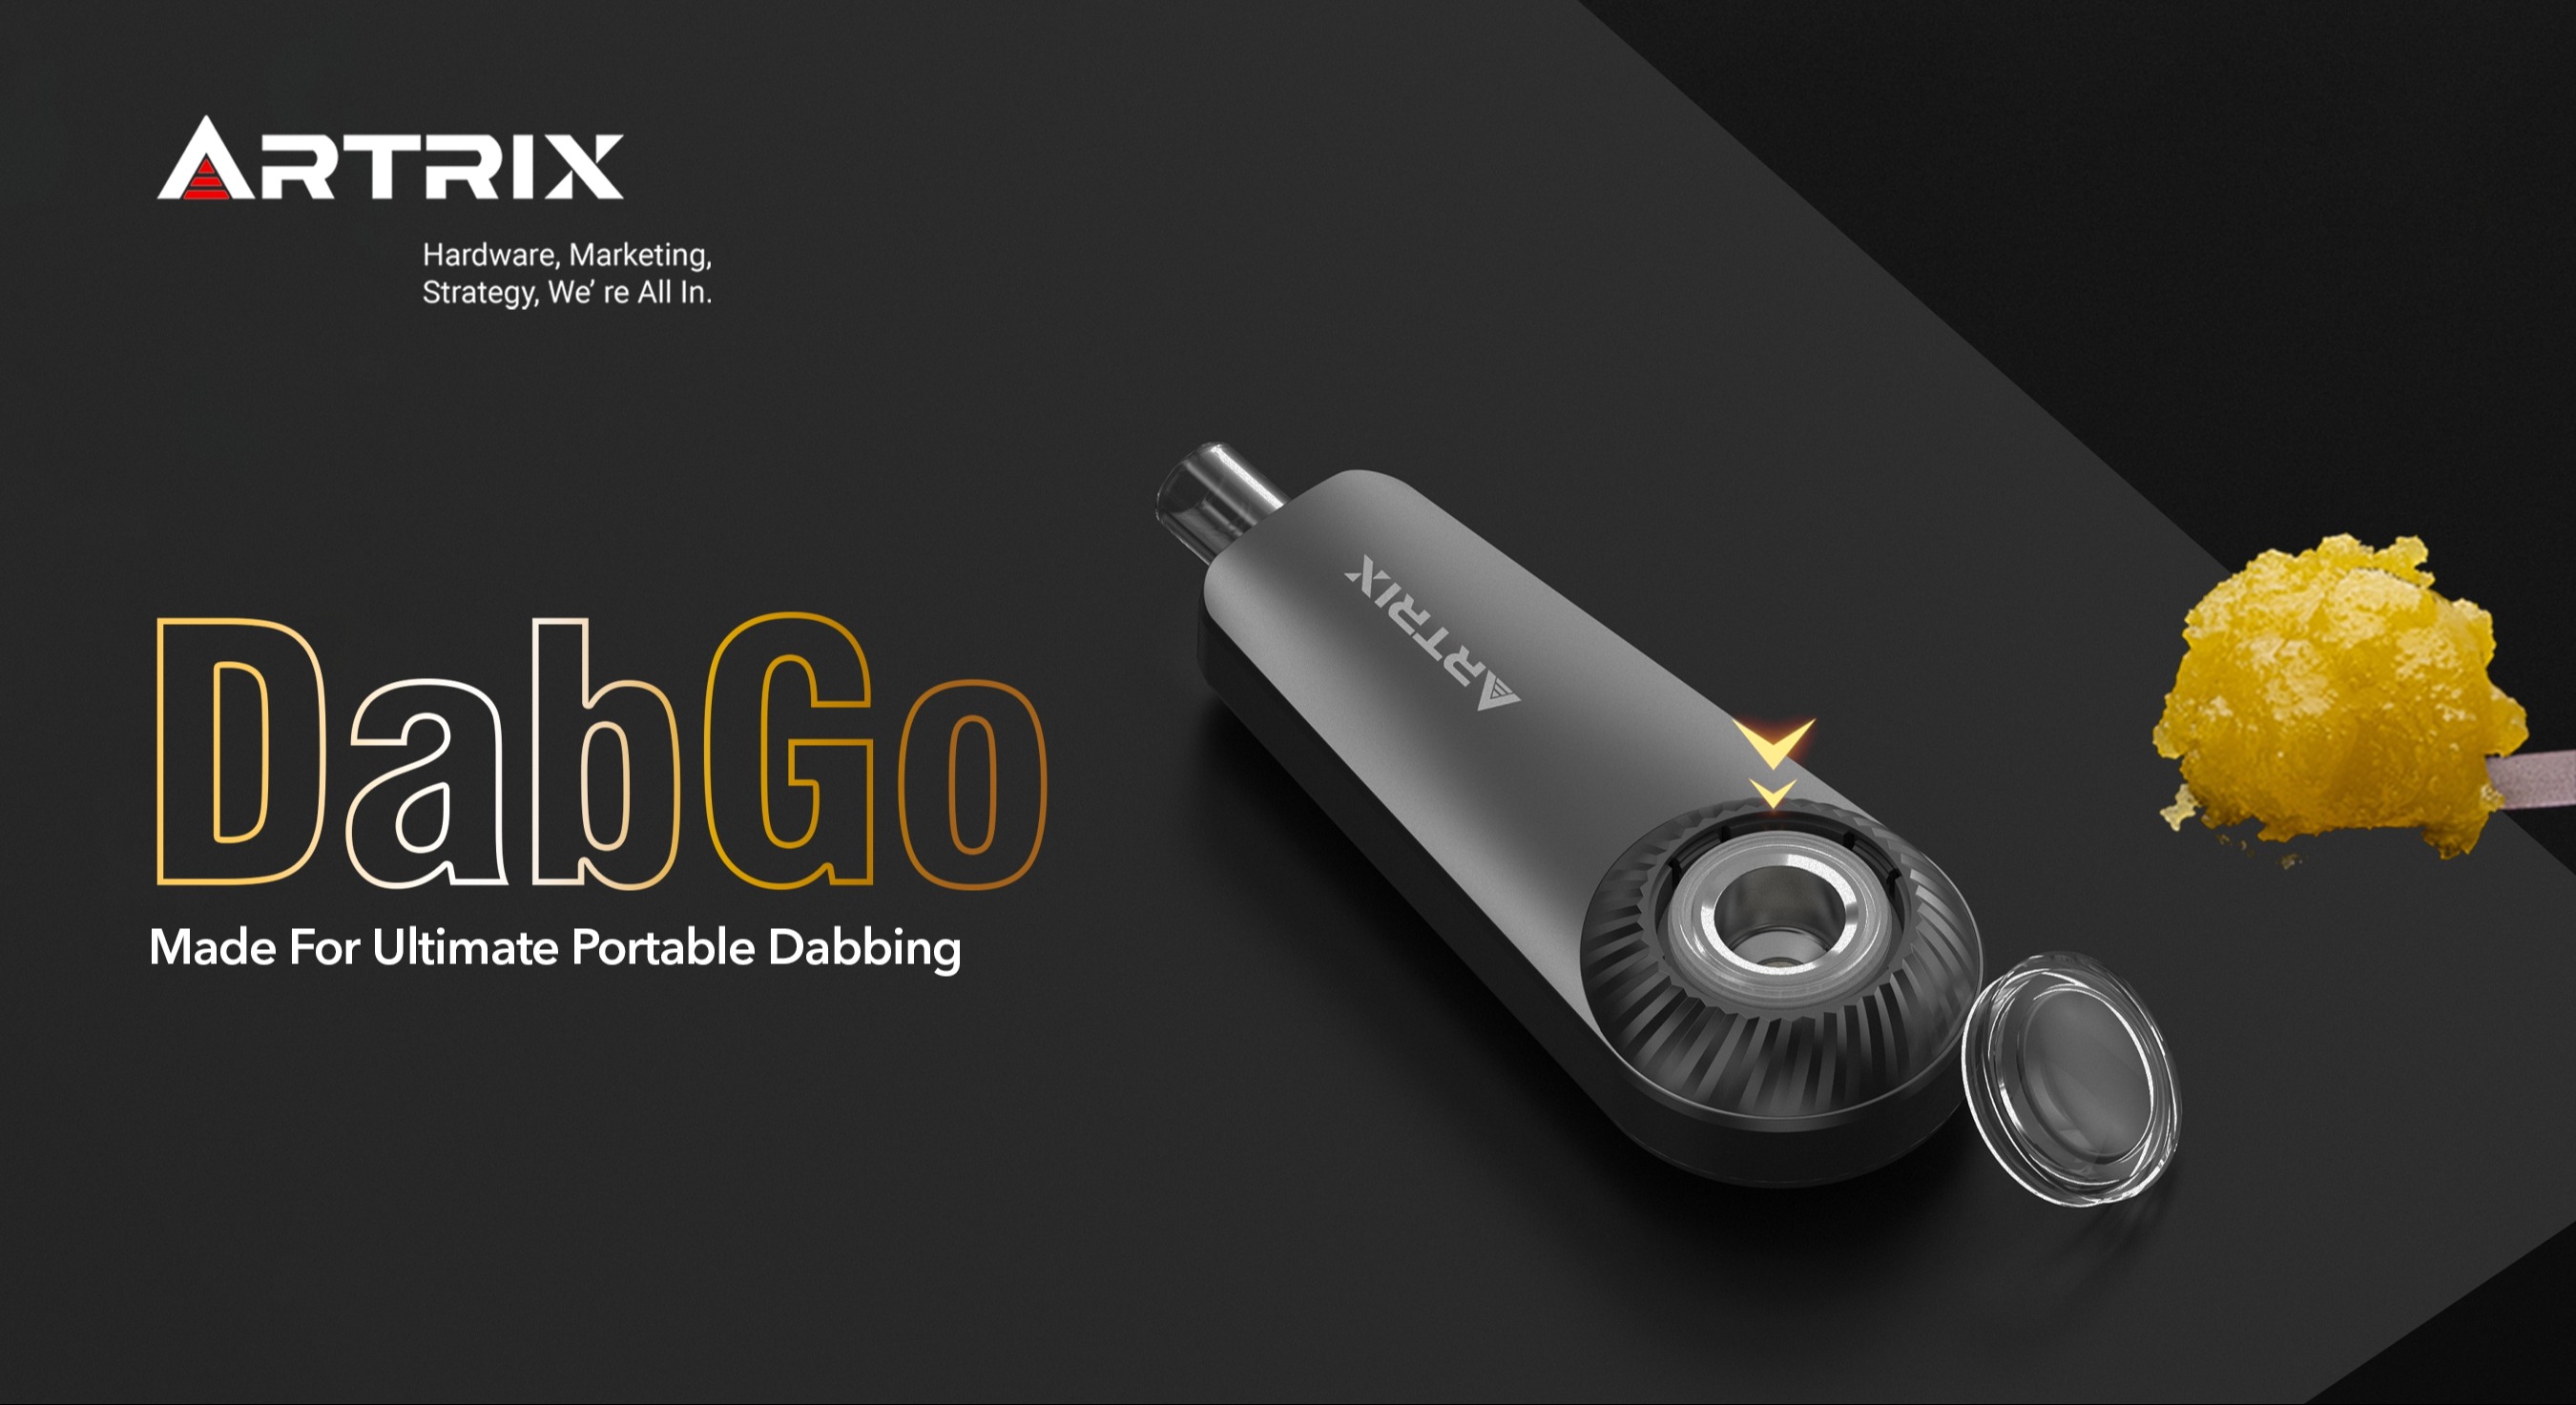 Artrix Launches DabGo - The First-Ever Disposable Dab Pen for Ultimate Portable Cannabis Dabbing Experience 1175